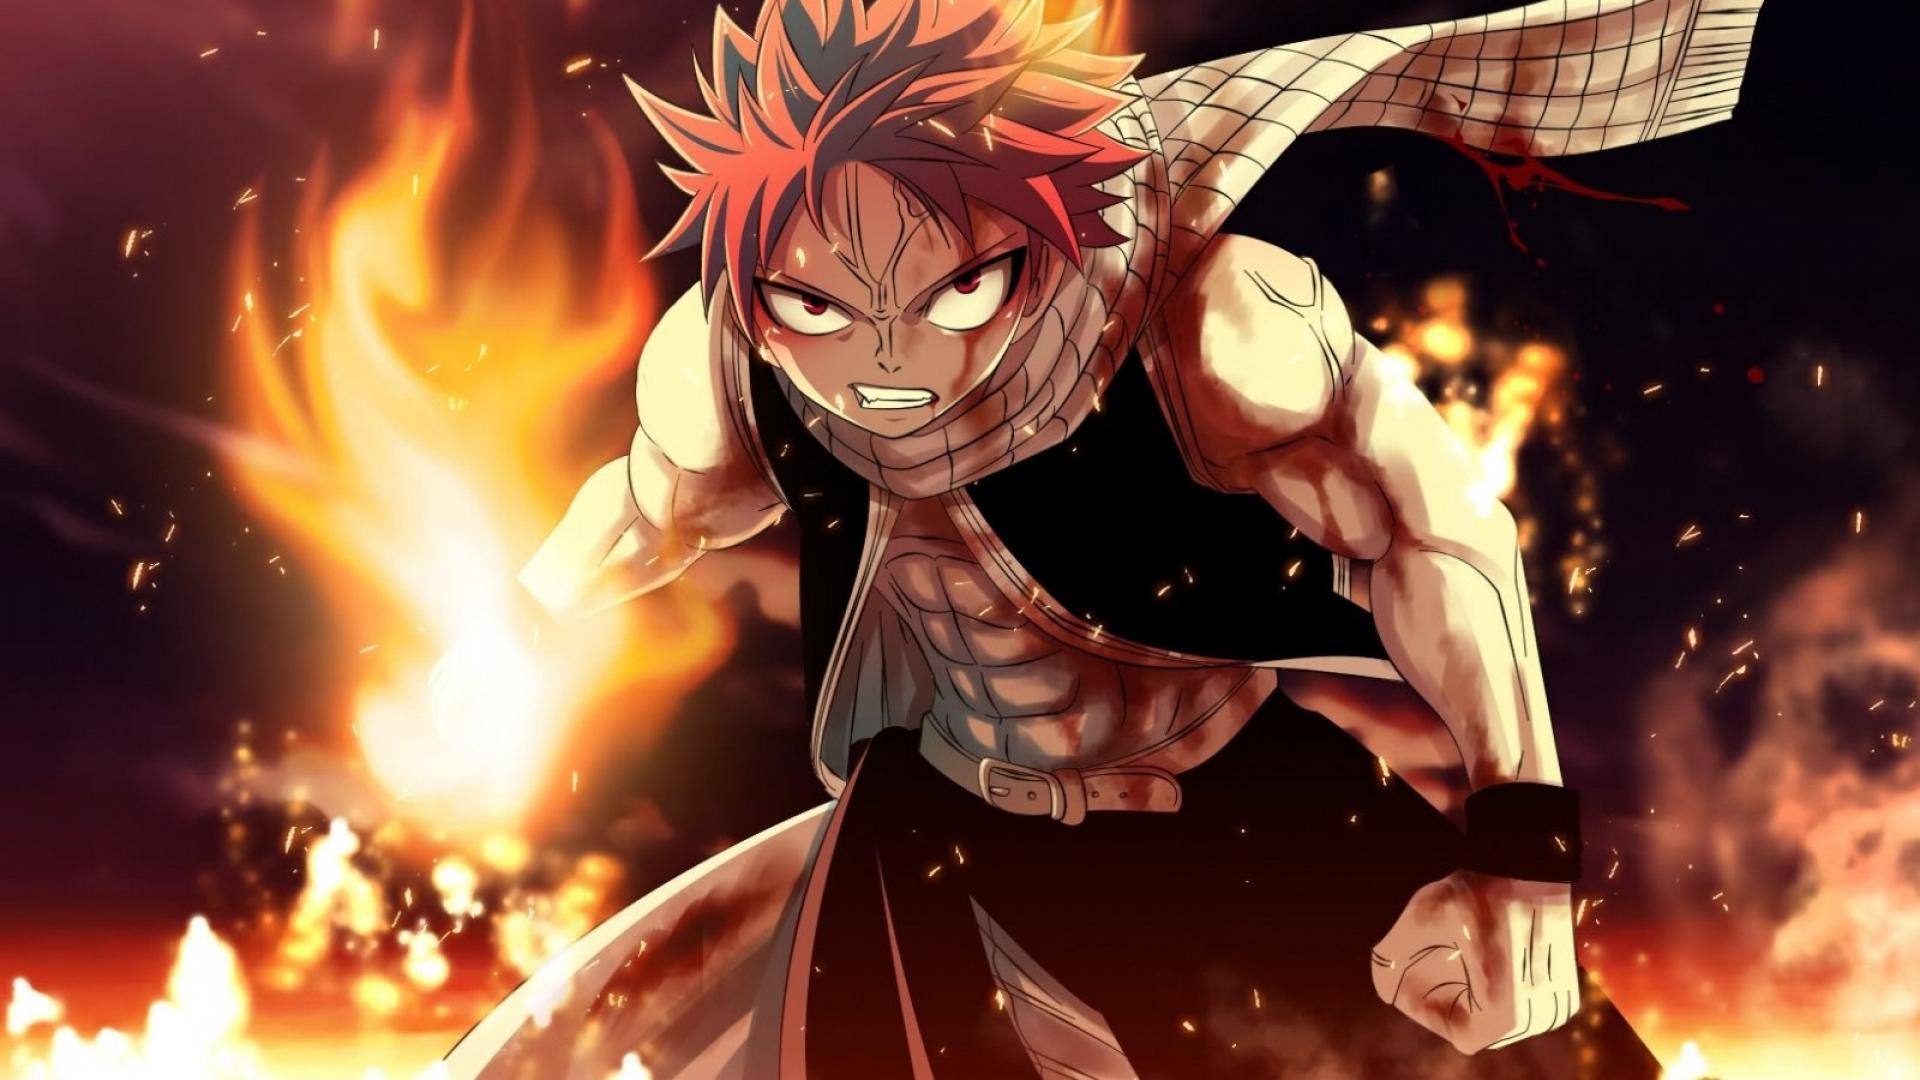 1592082 Fairy Tail wallpapers HD free wallpapers backgrounds image